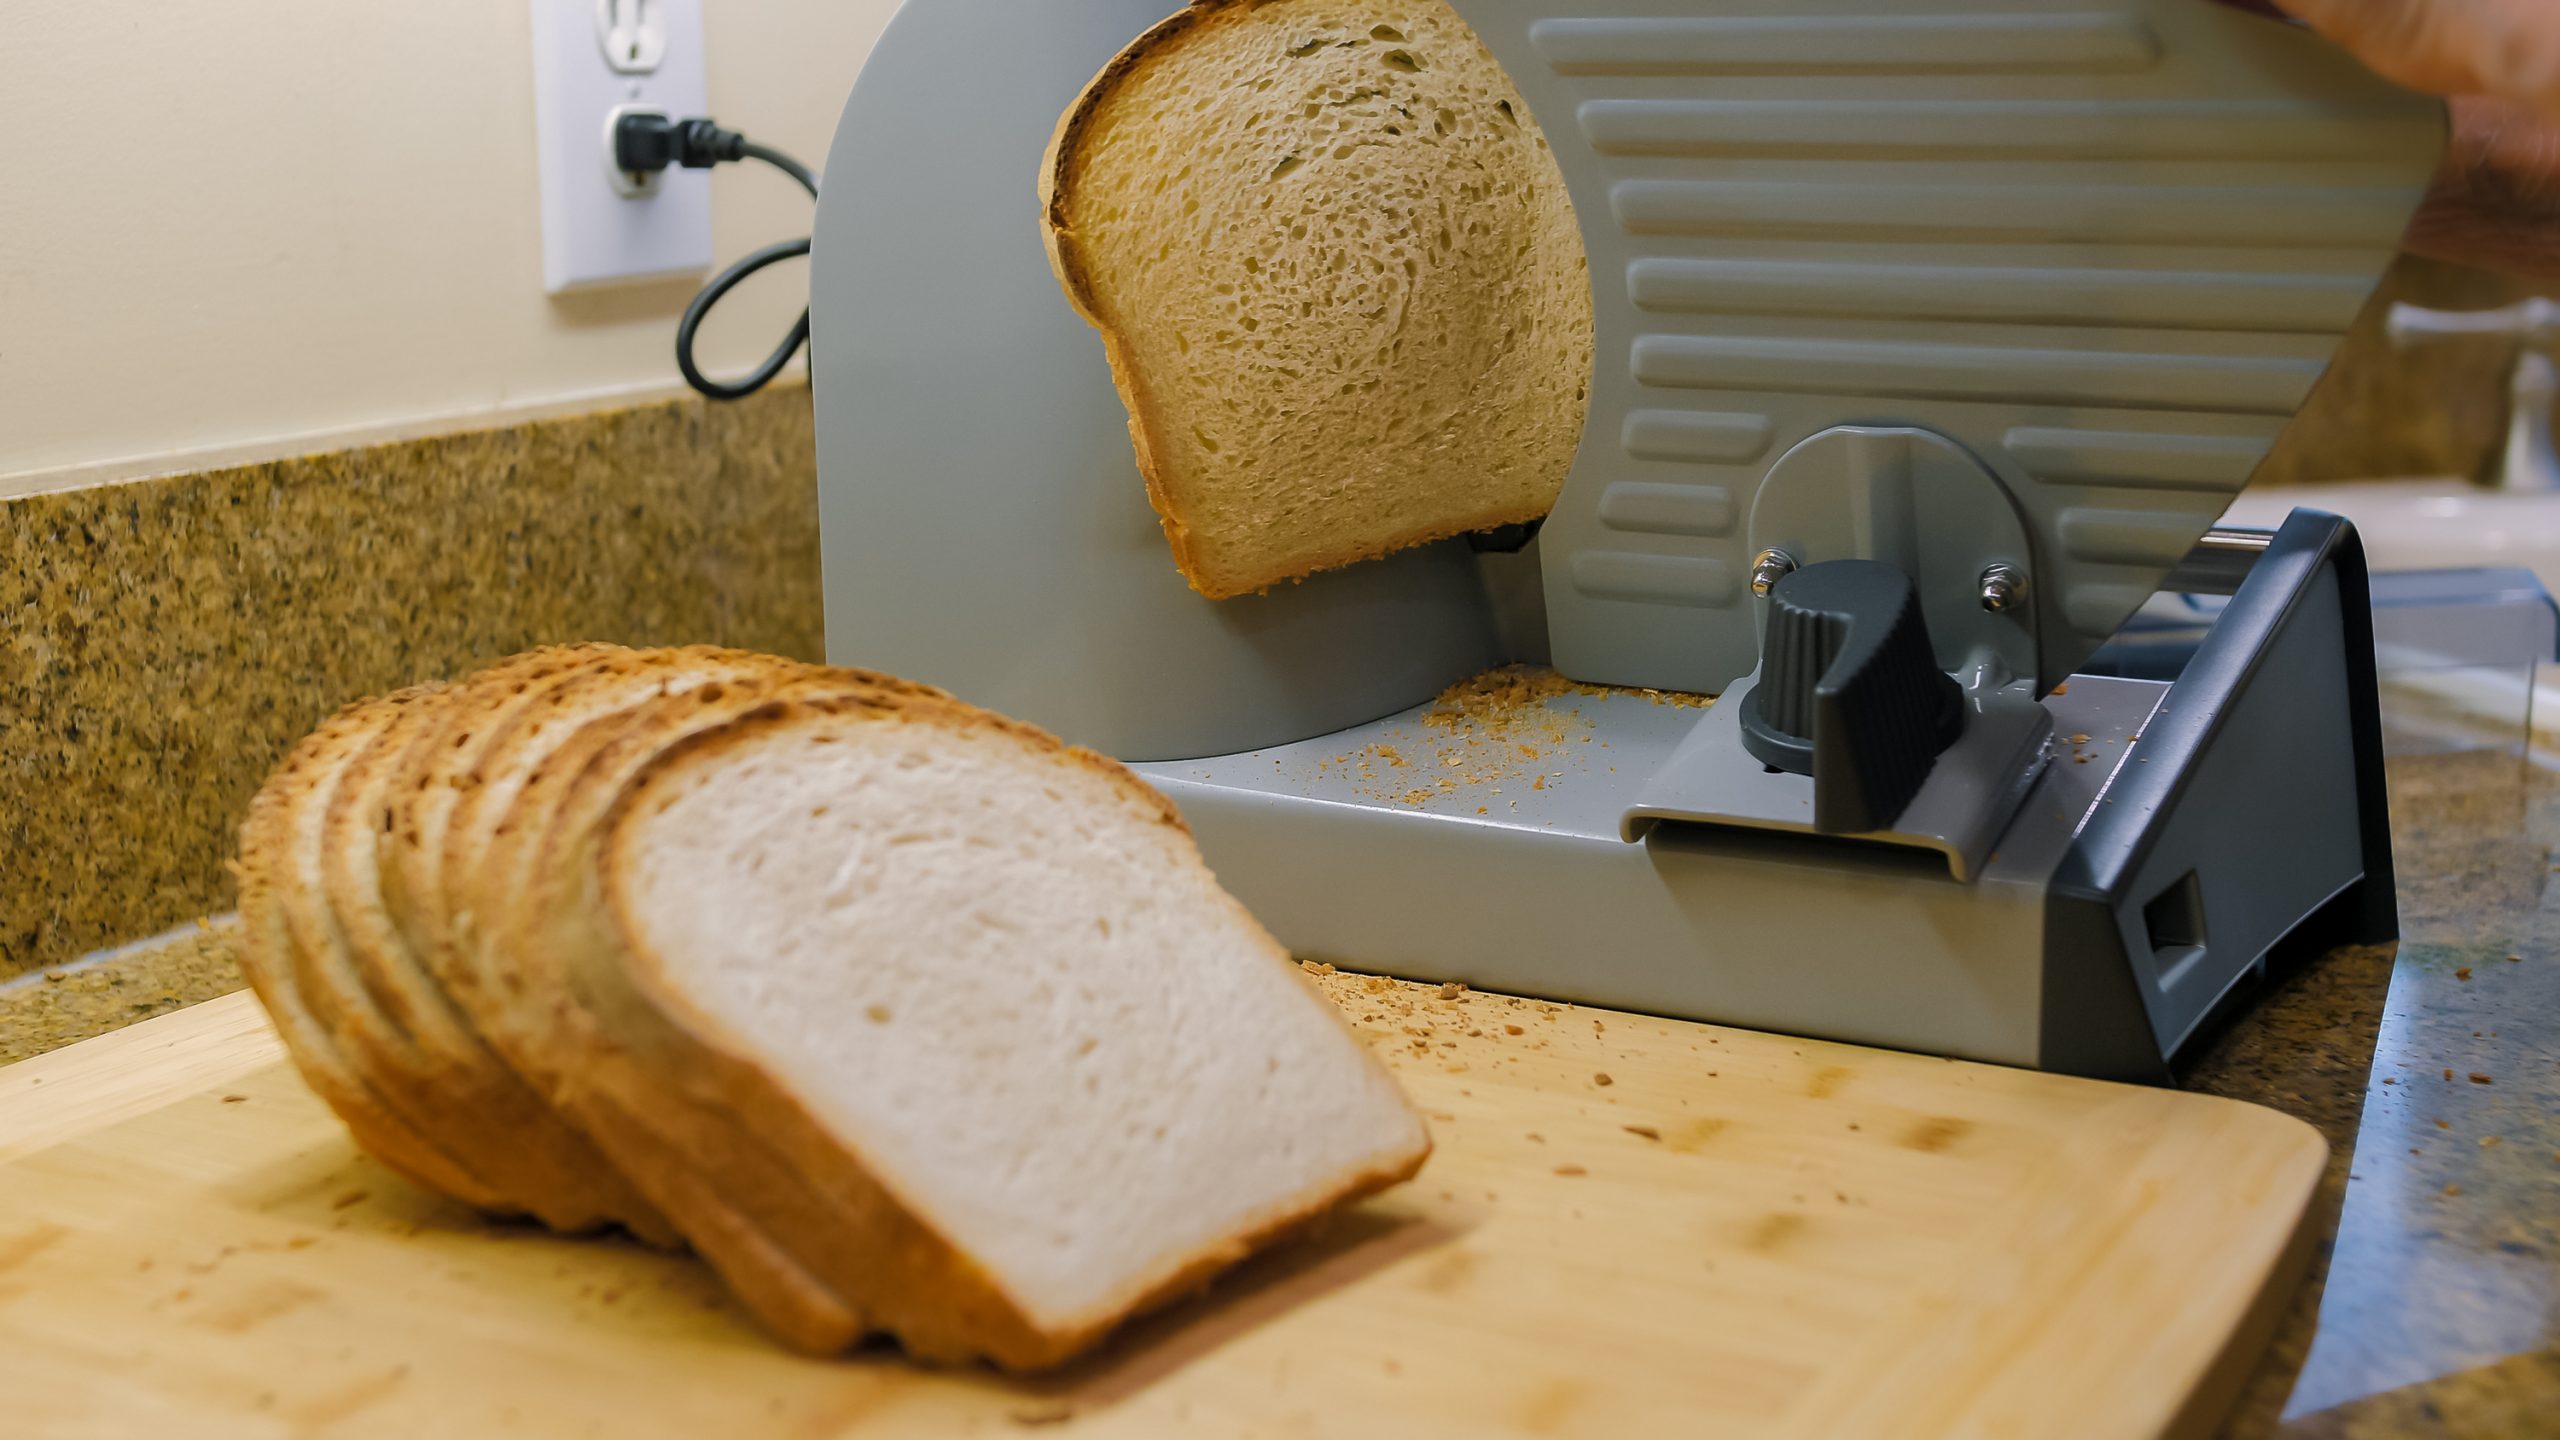 Dbtech Wood Bread Slicer for Homemade Bread, Compact & Foldable Bread Slice  Guide